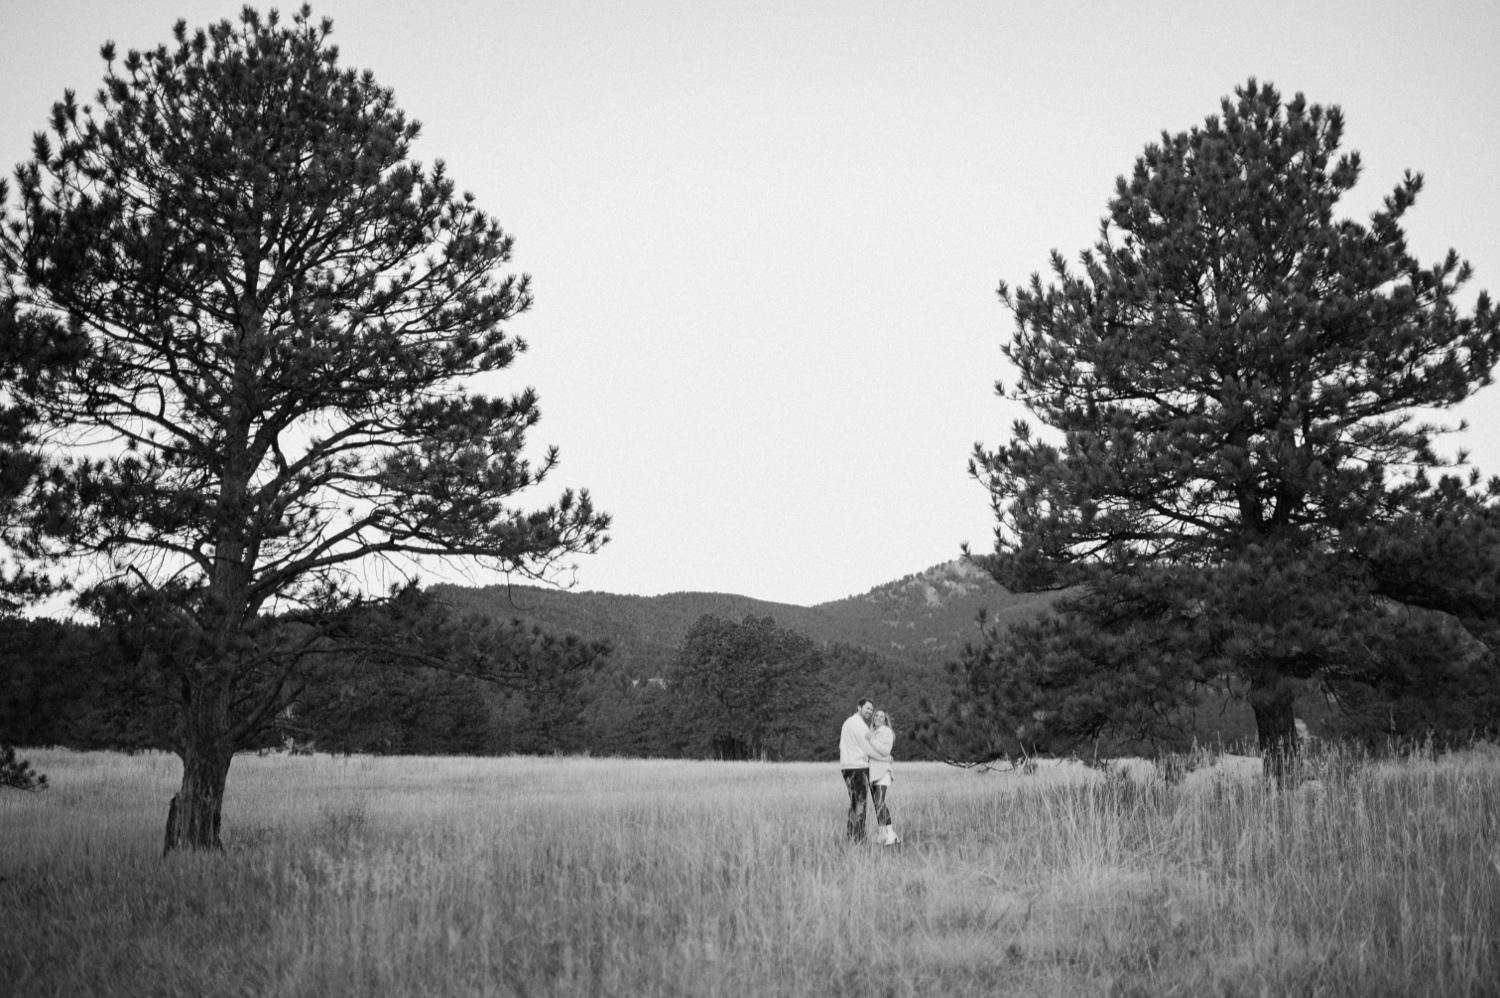 A black and white photos of an engaged couple embracing each other in Elk Meadow Park in Evergreen, Colorado for their Colorado engagement photos, taken by Colorado wedding photographer Ashley Joyce Photography.